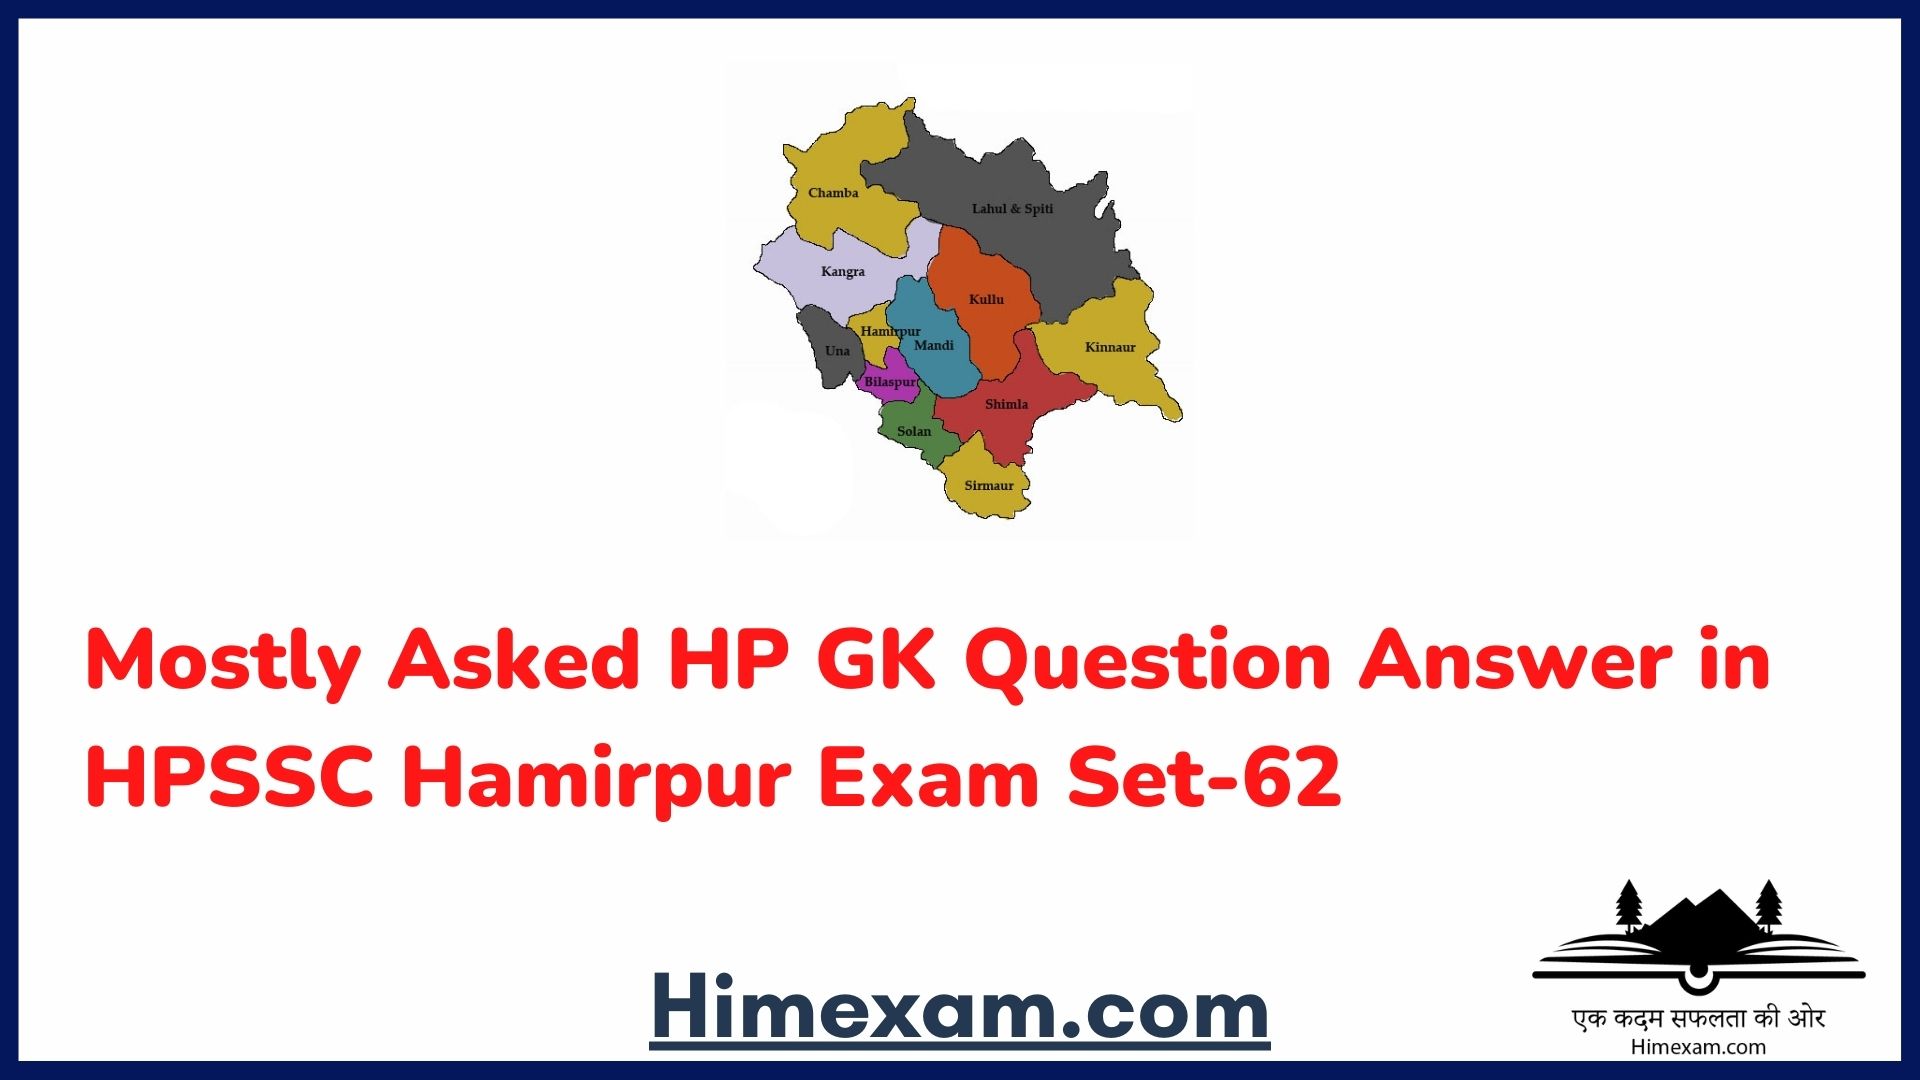 Mostly Asked HP GK Question Answer in HPSSC Hamirpur Exam Set-62